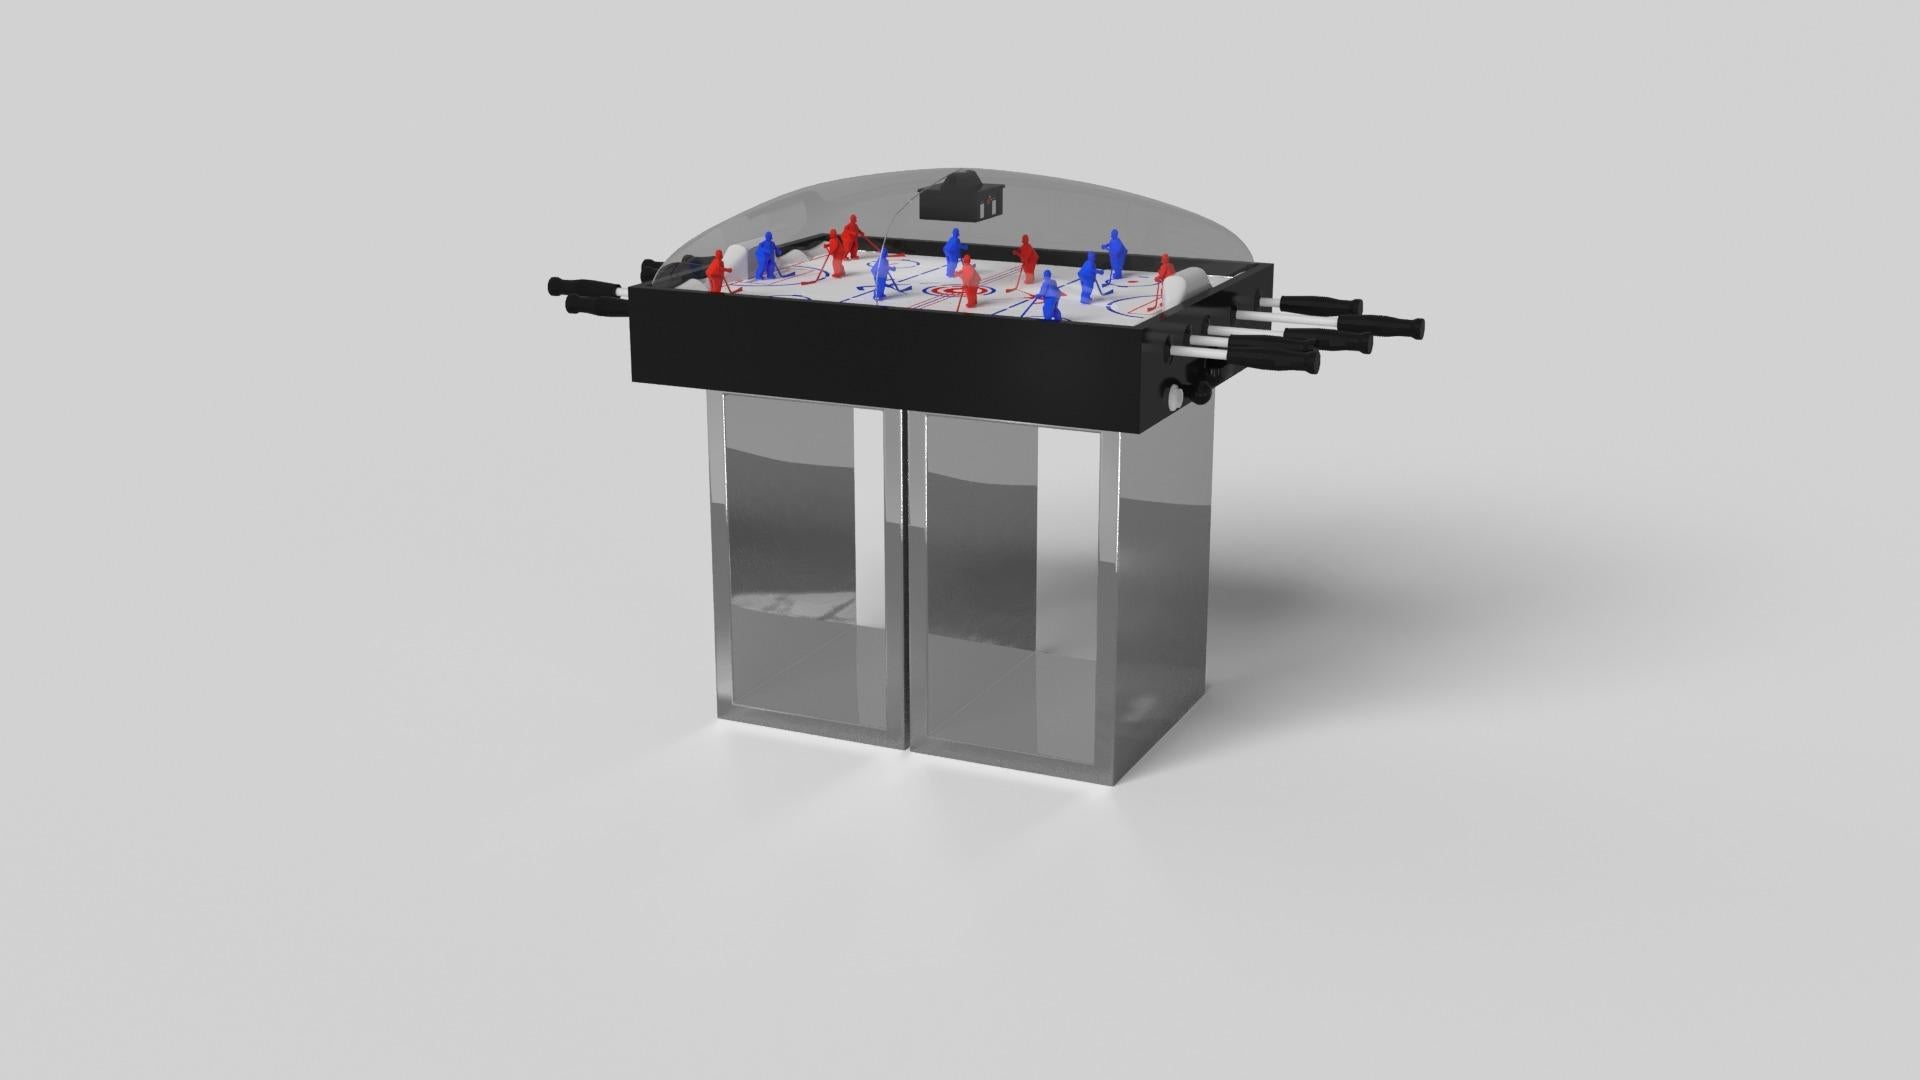 Supported by two rectangular open pedestals as the base, this handcrafted bubble hockey table is modern and minimalistic with its combination of simple, geometric forms. Viewed from the front, the use of negative space is evident; viewed from the